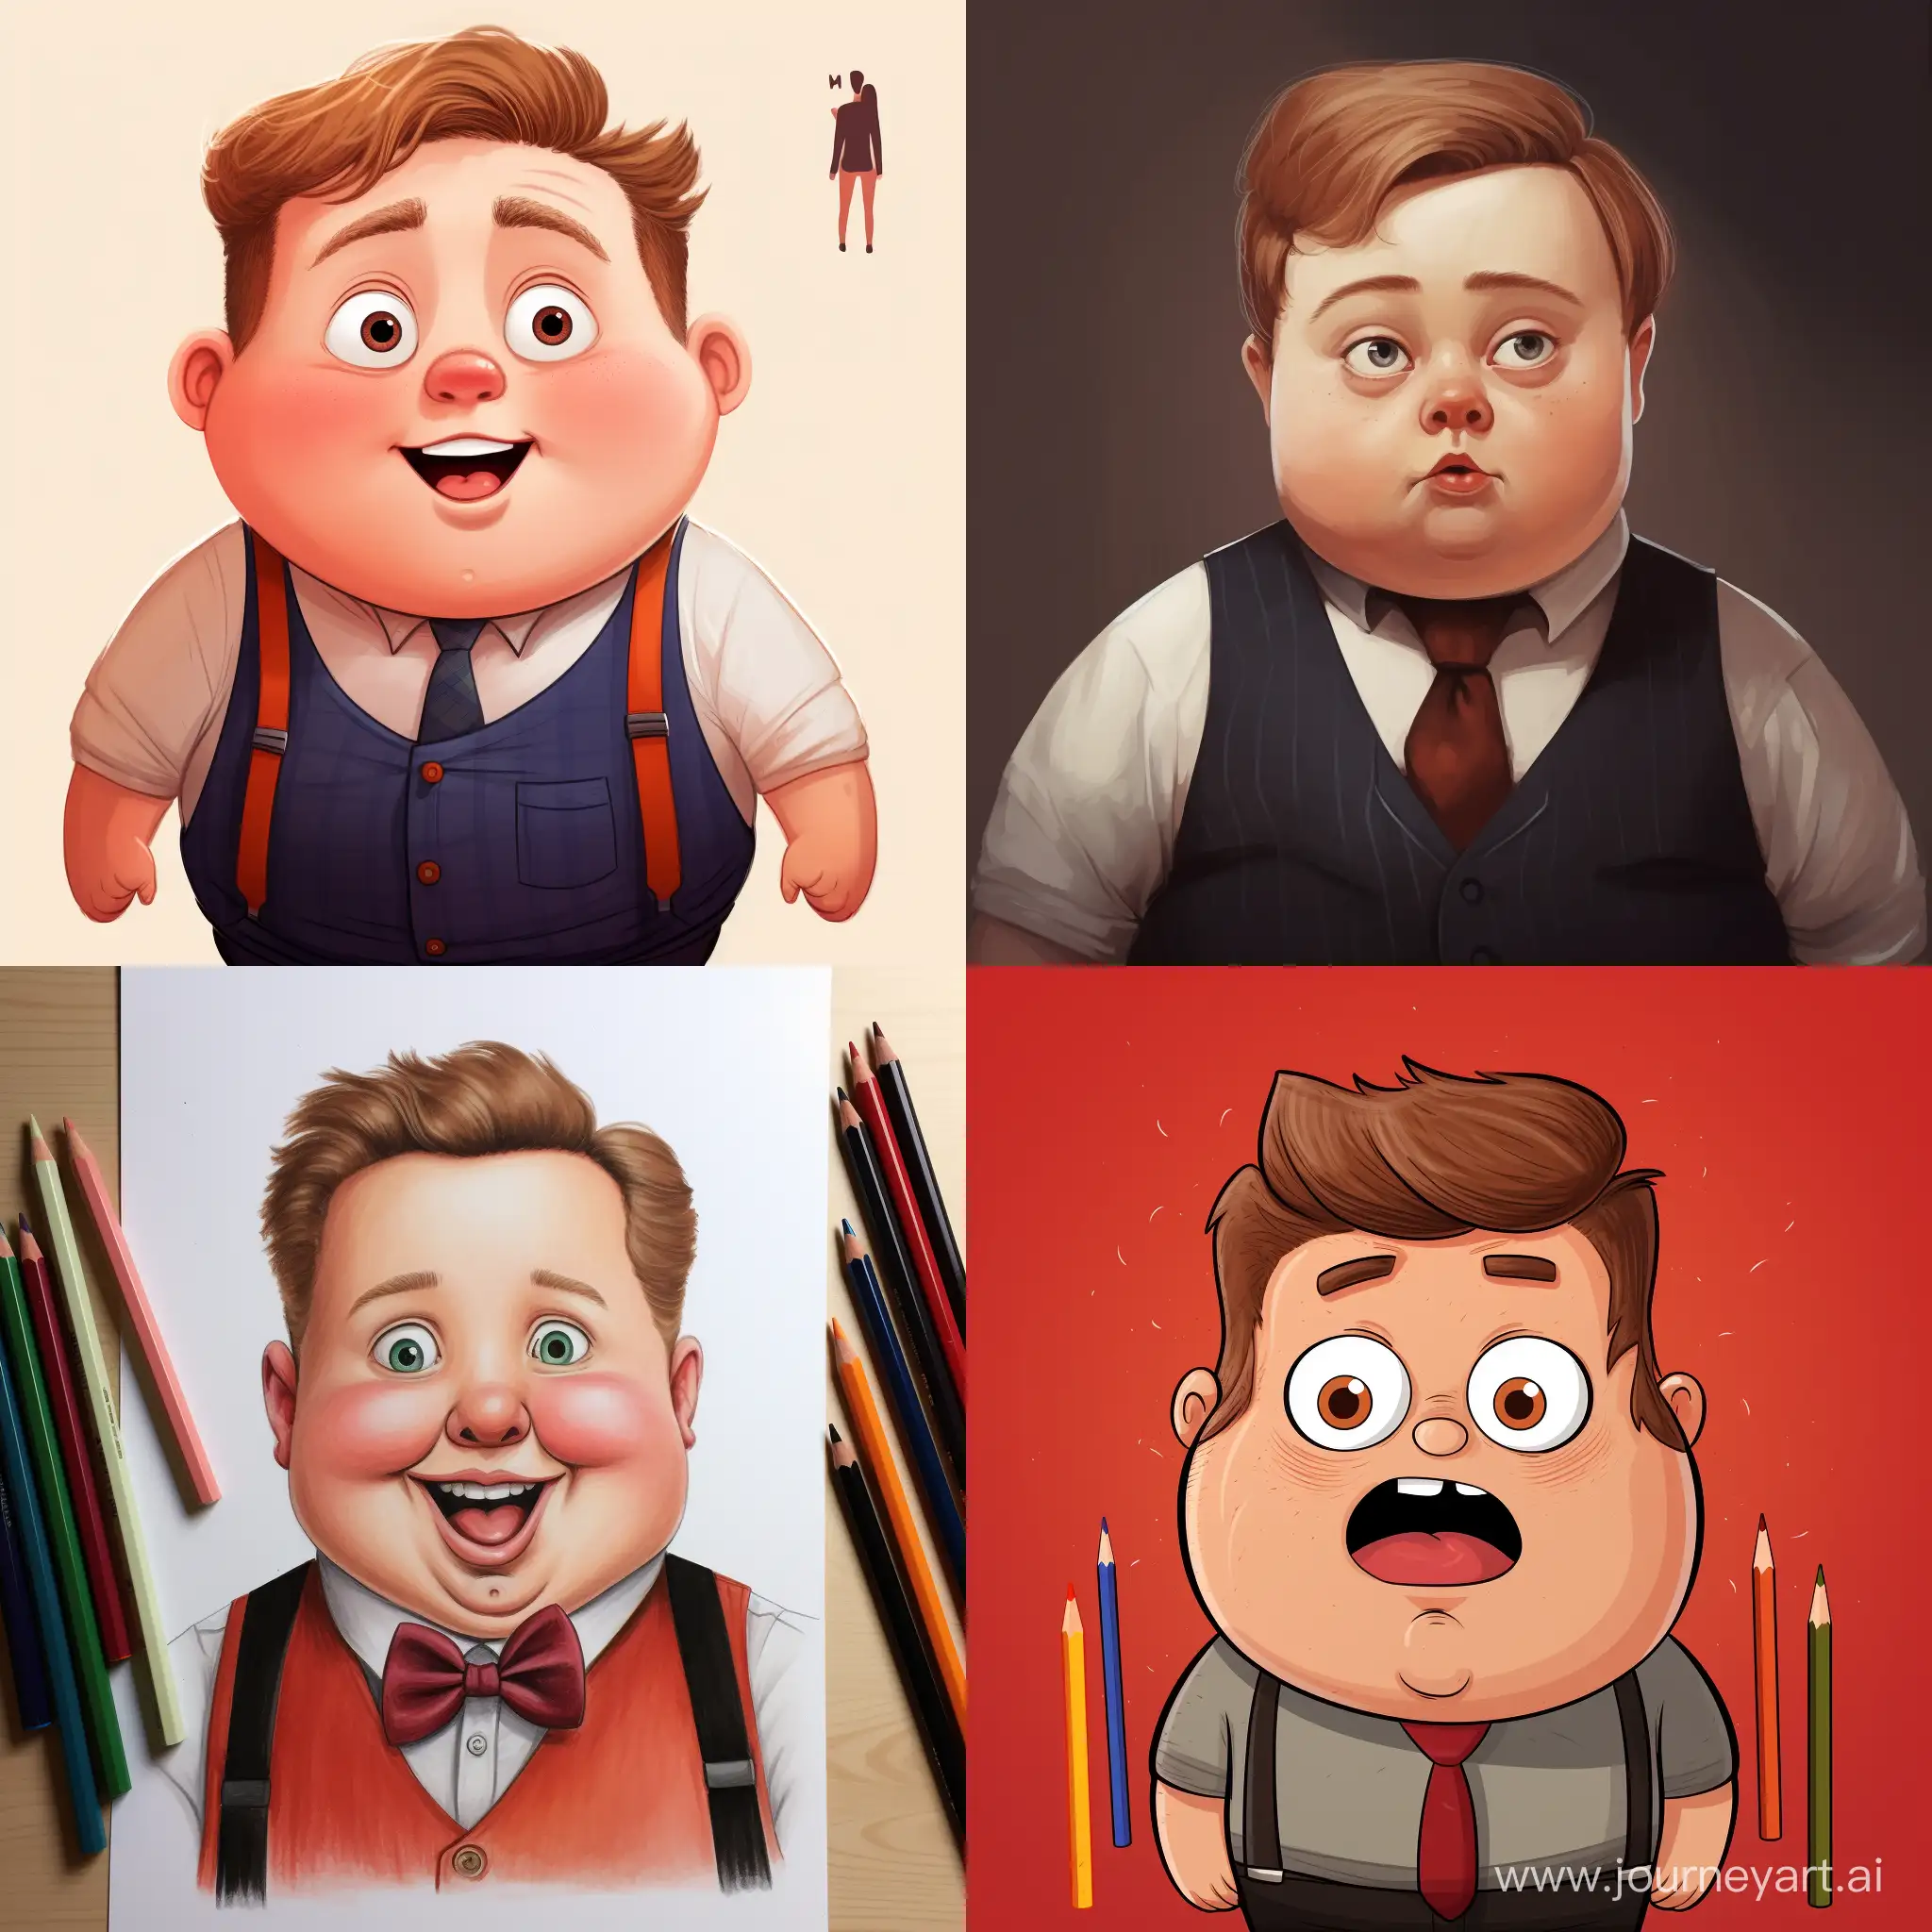 Cheerful-Chubby-Boy-in-Vest-with-Surprised-Expression